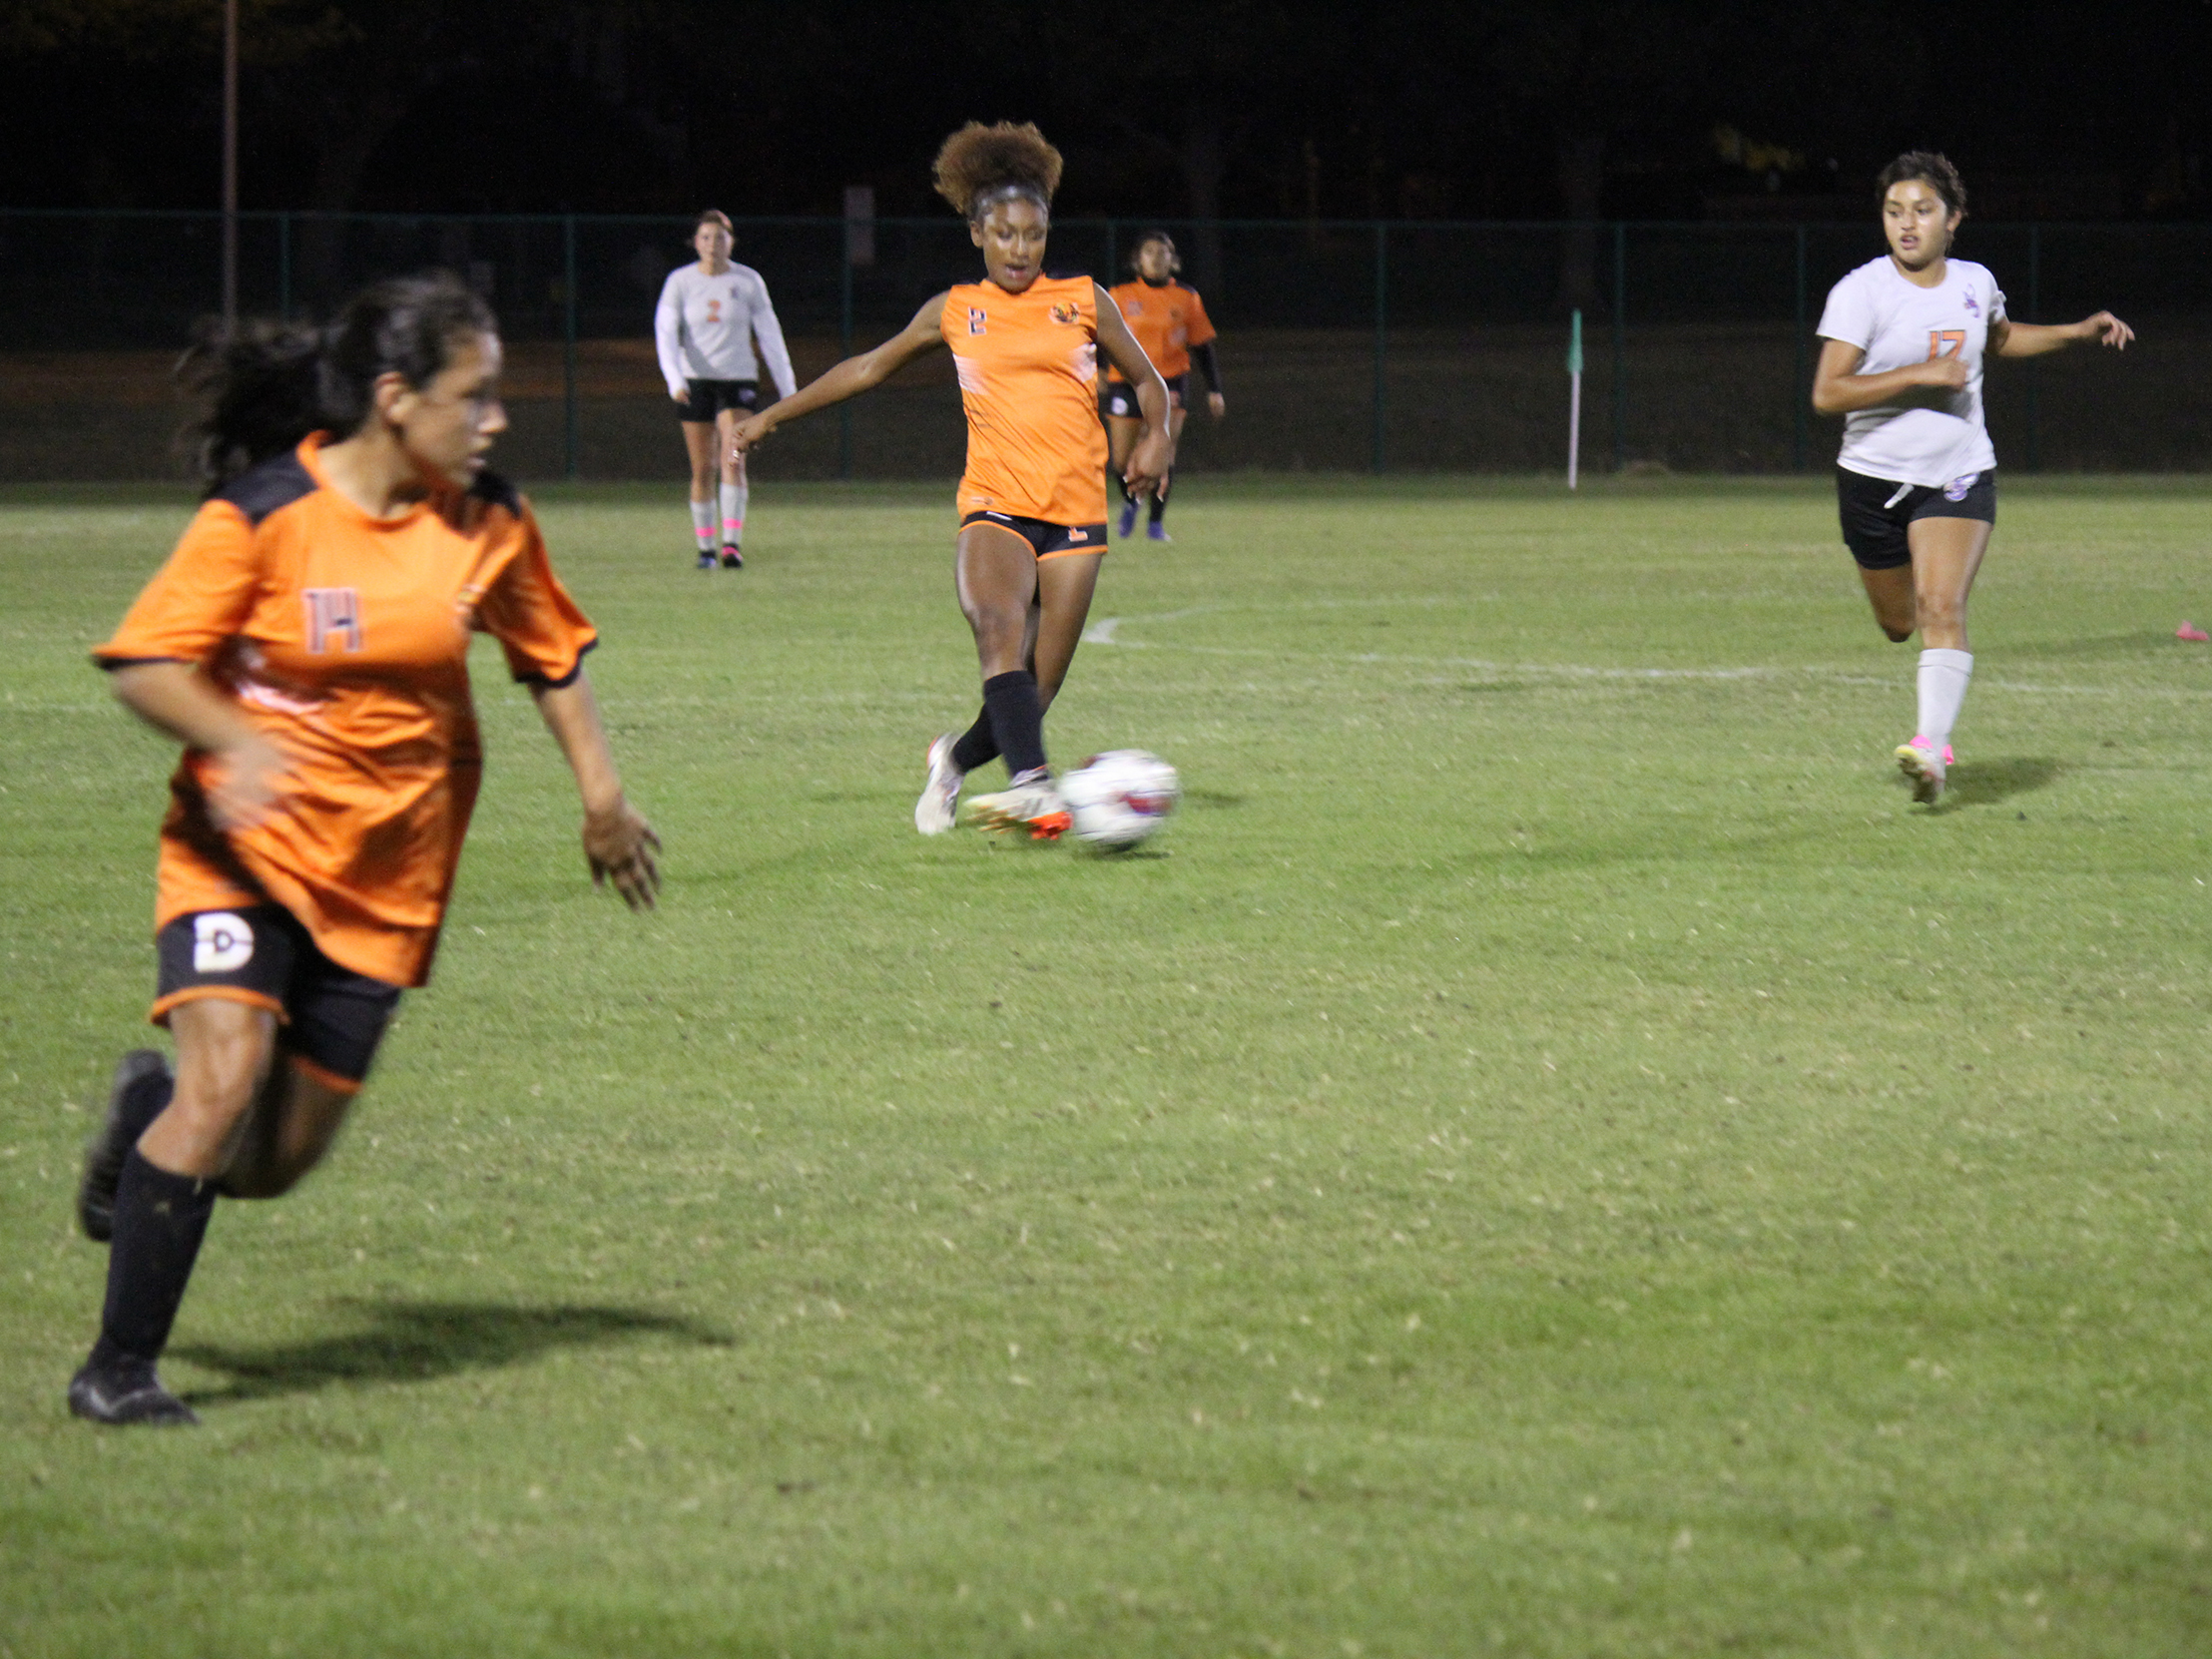 Women's Soccer Wins First Two Games for First Time in Program History